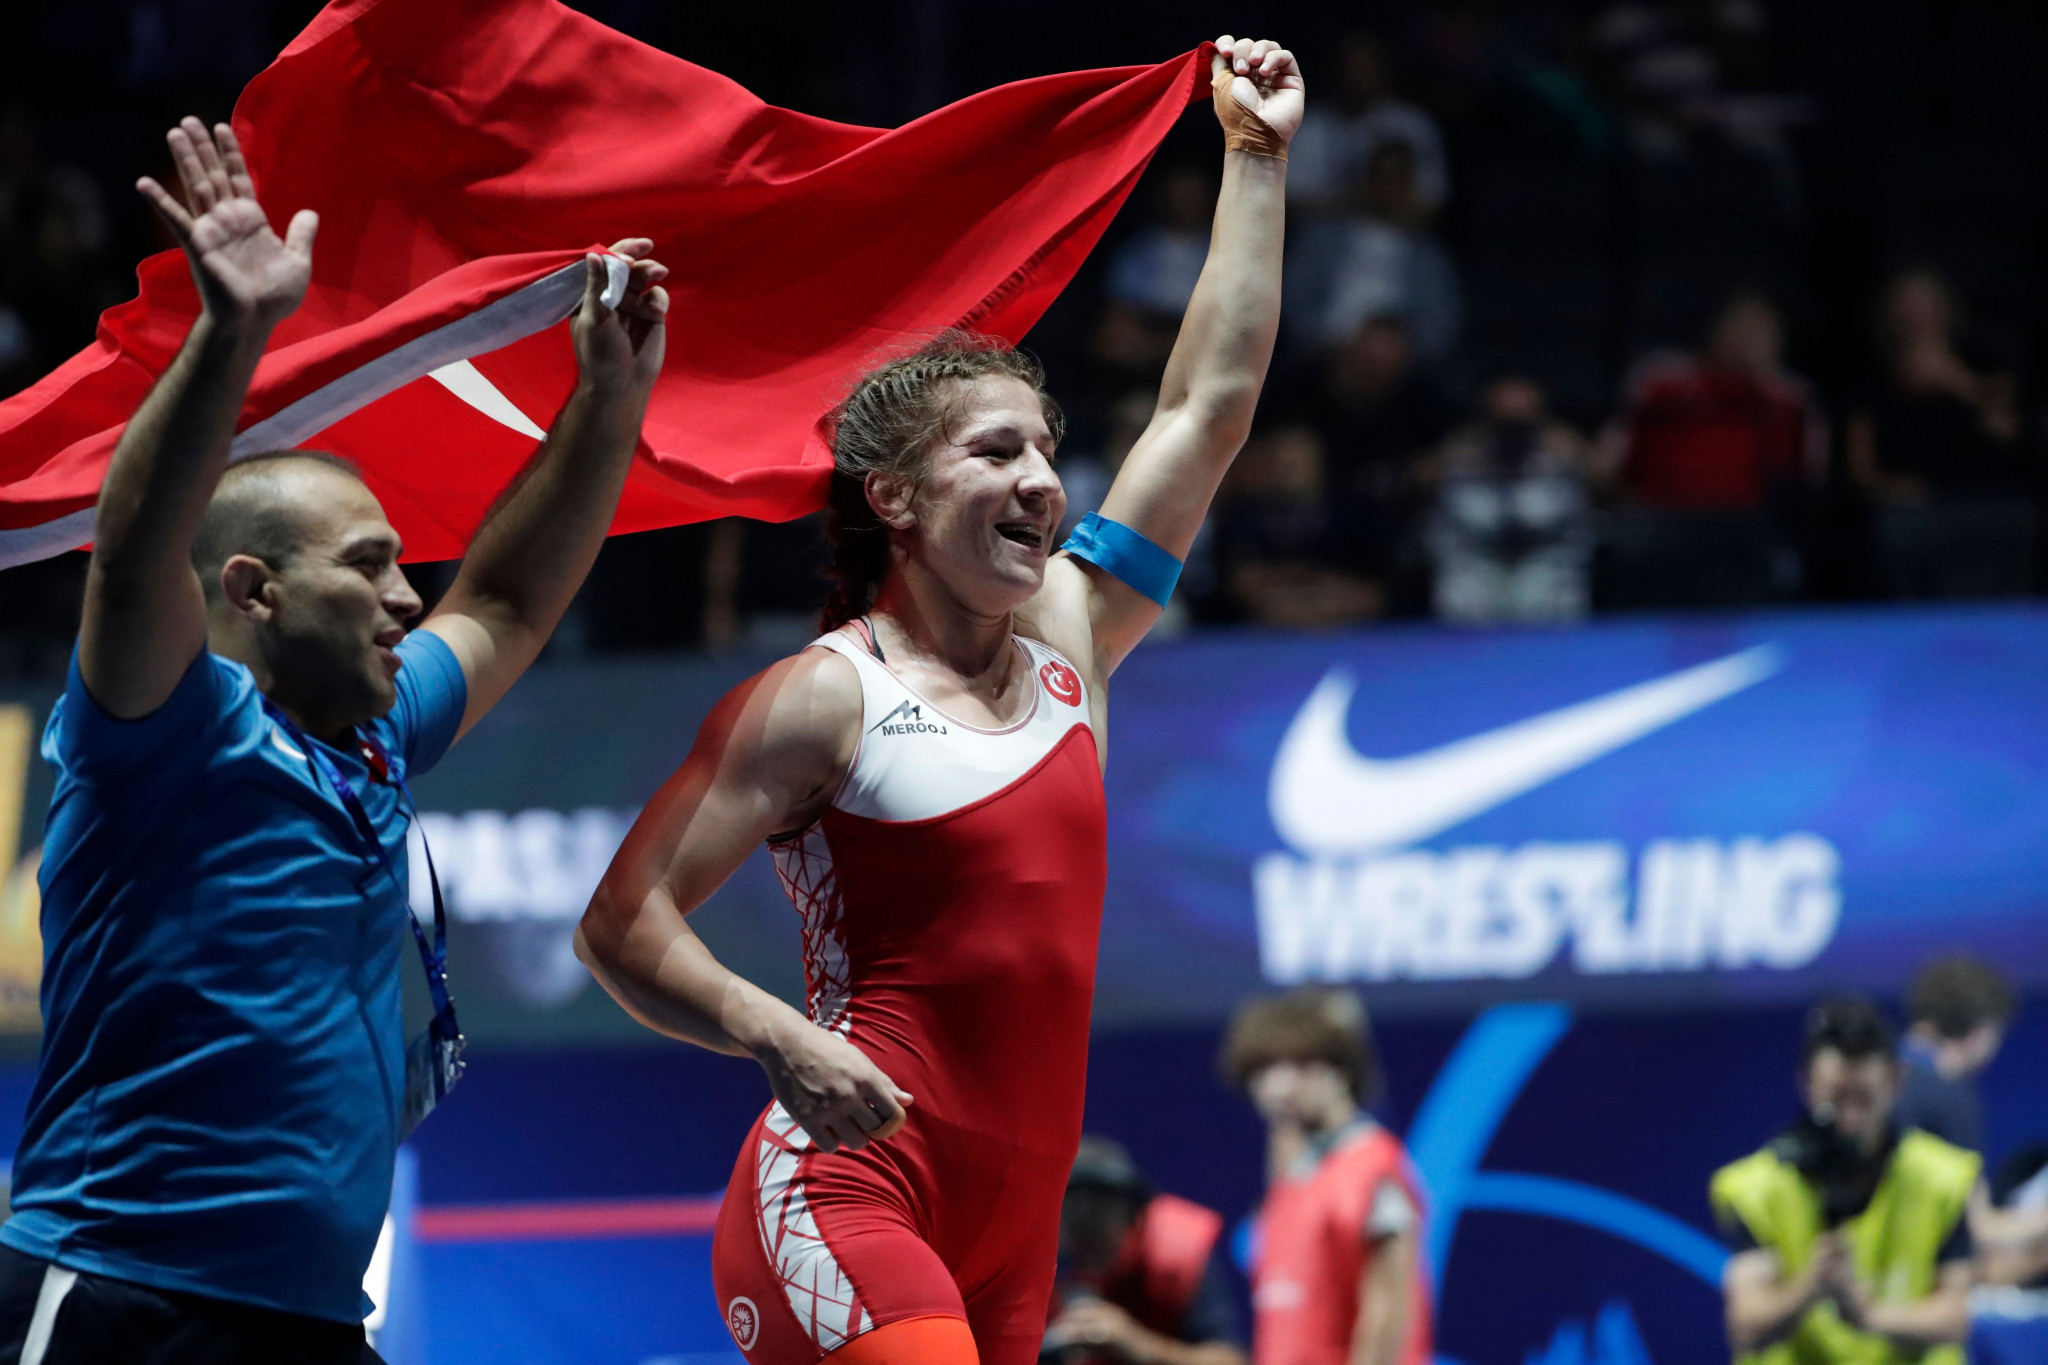 Turkey has a strong wrestling history and has staged both the Summer and Winter Universiade in the past 20 years ©Getty Images